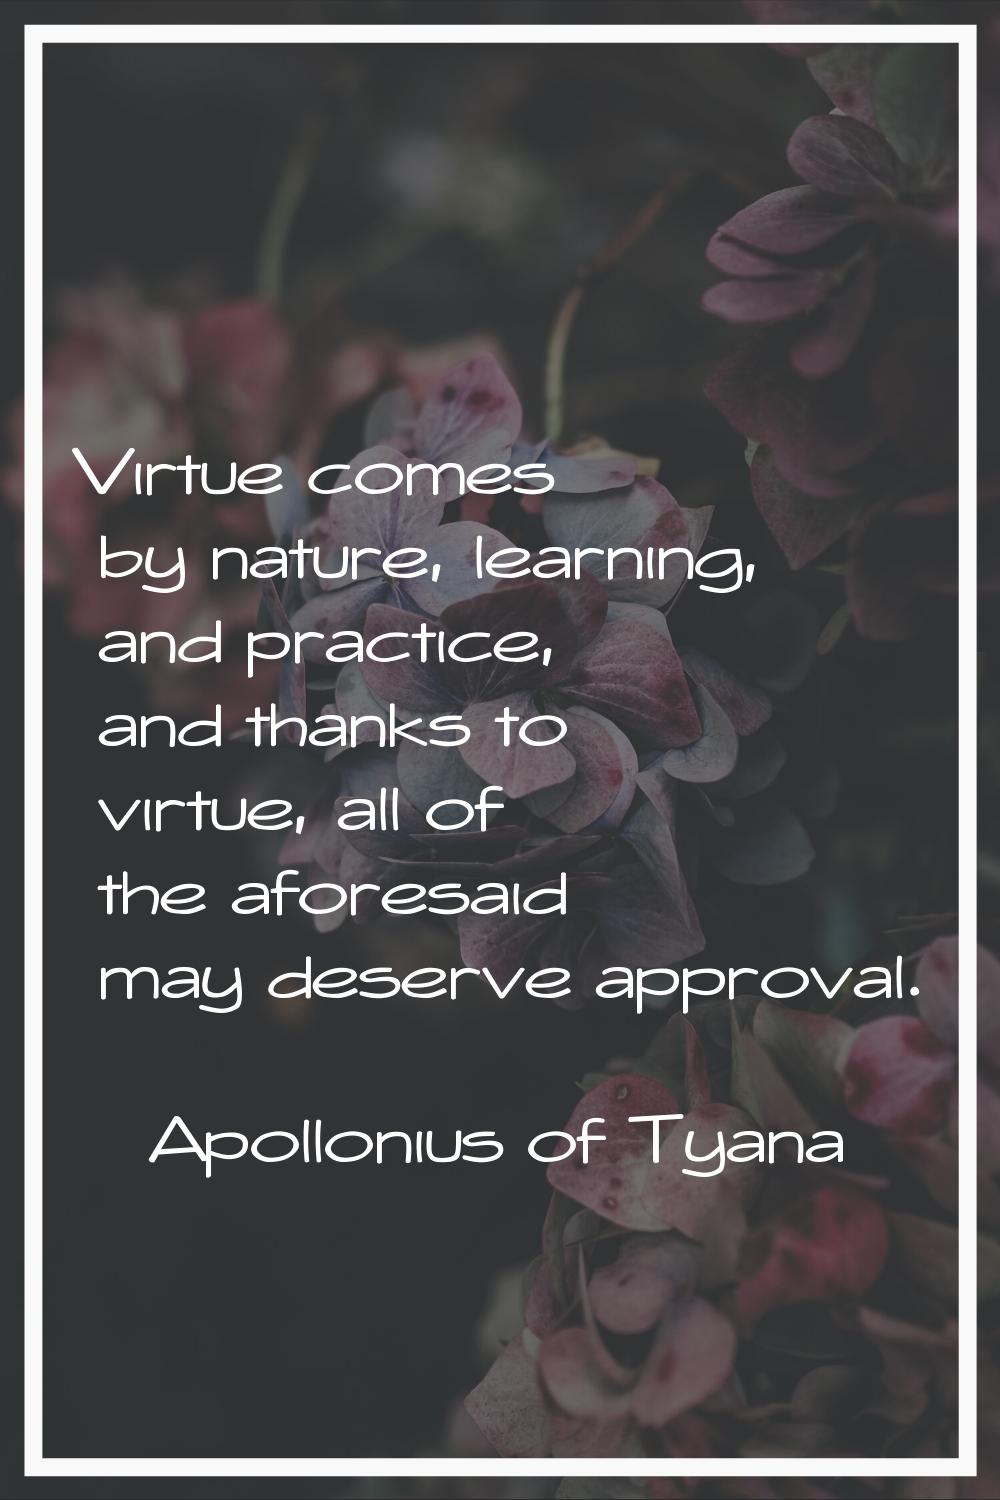 Virtue comes by nature, learning, and practice, and thanks to virtue, all of the aforesaid may dese